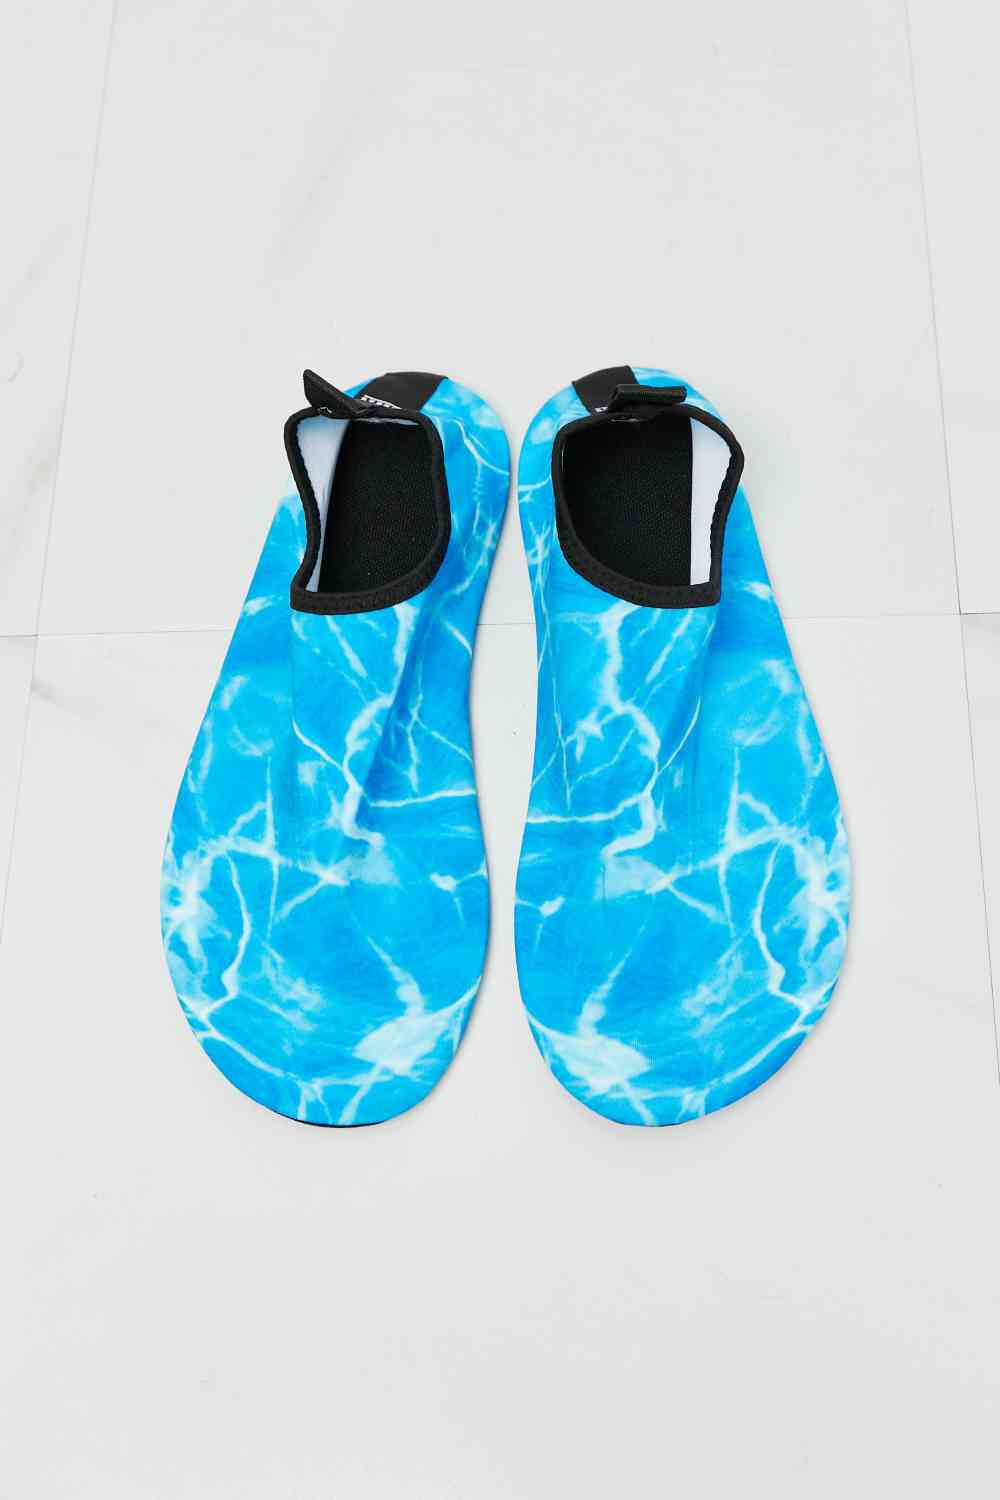 MMshoes On The Shore Water Shoes in Sky Blue - Alonna's Legging Land